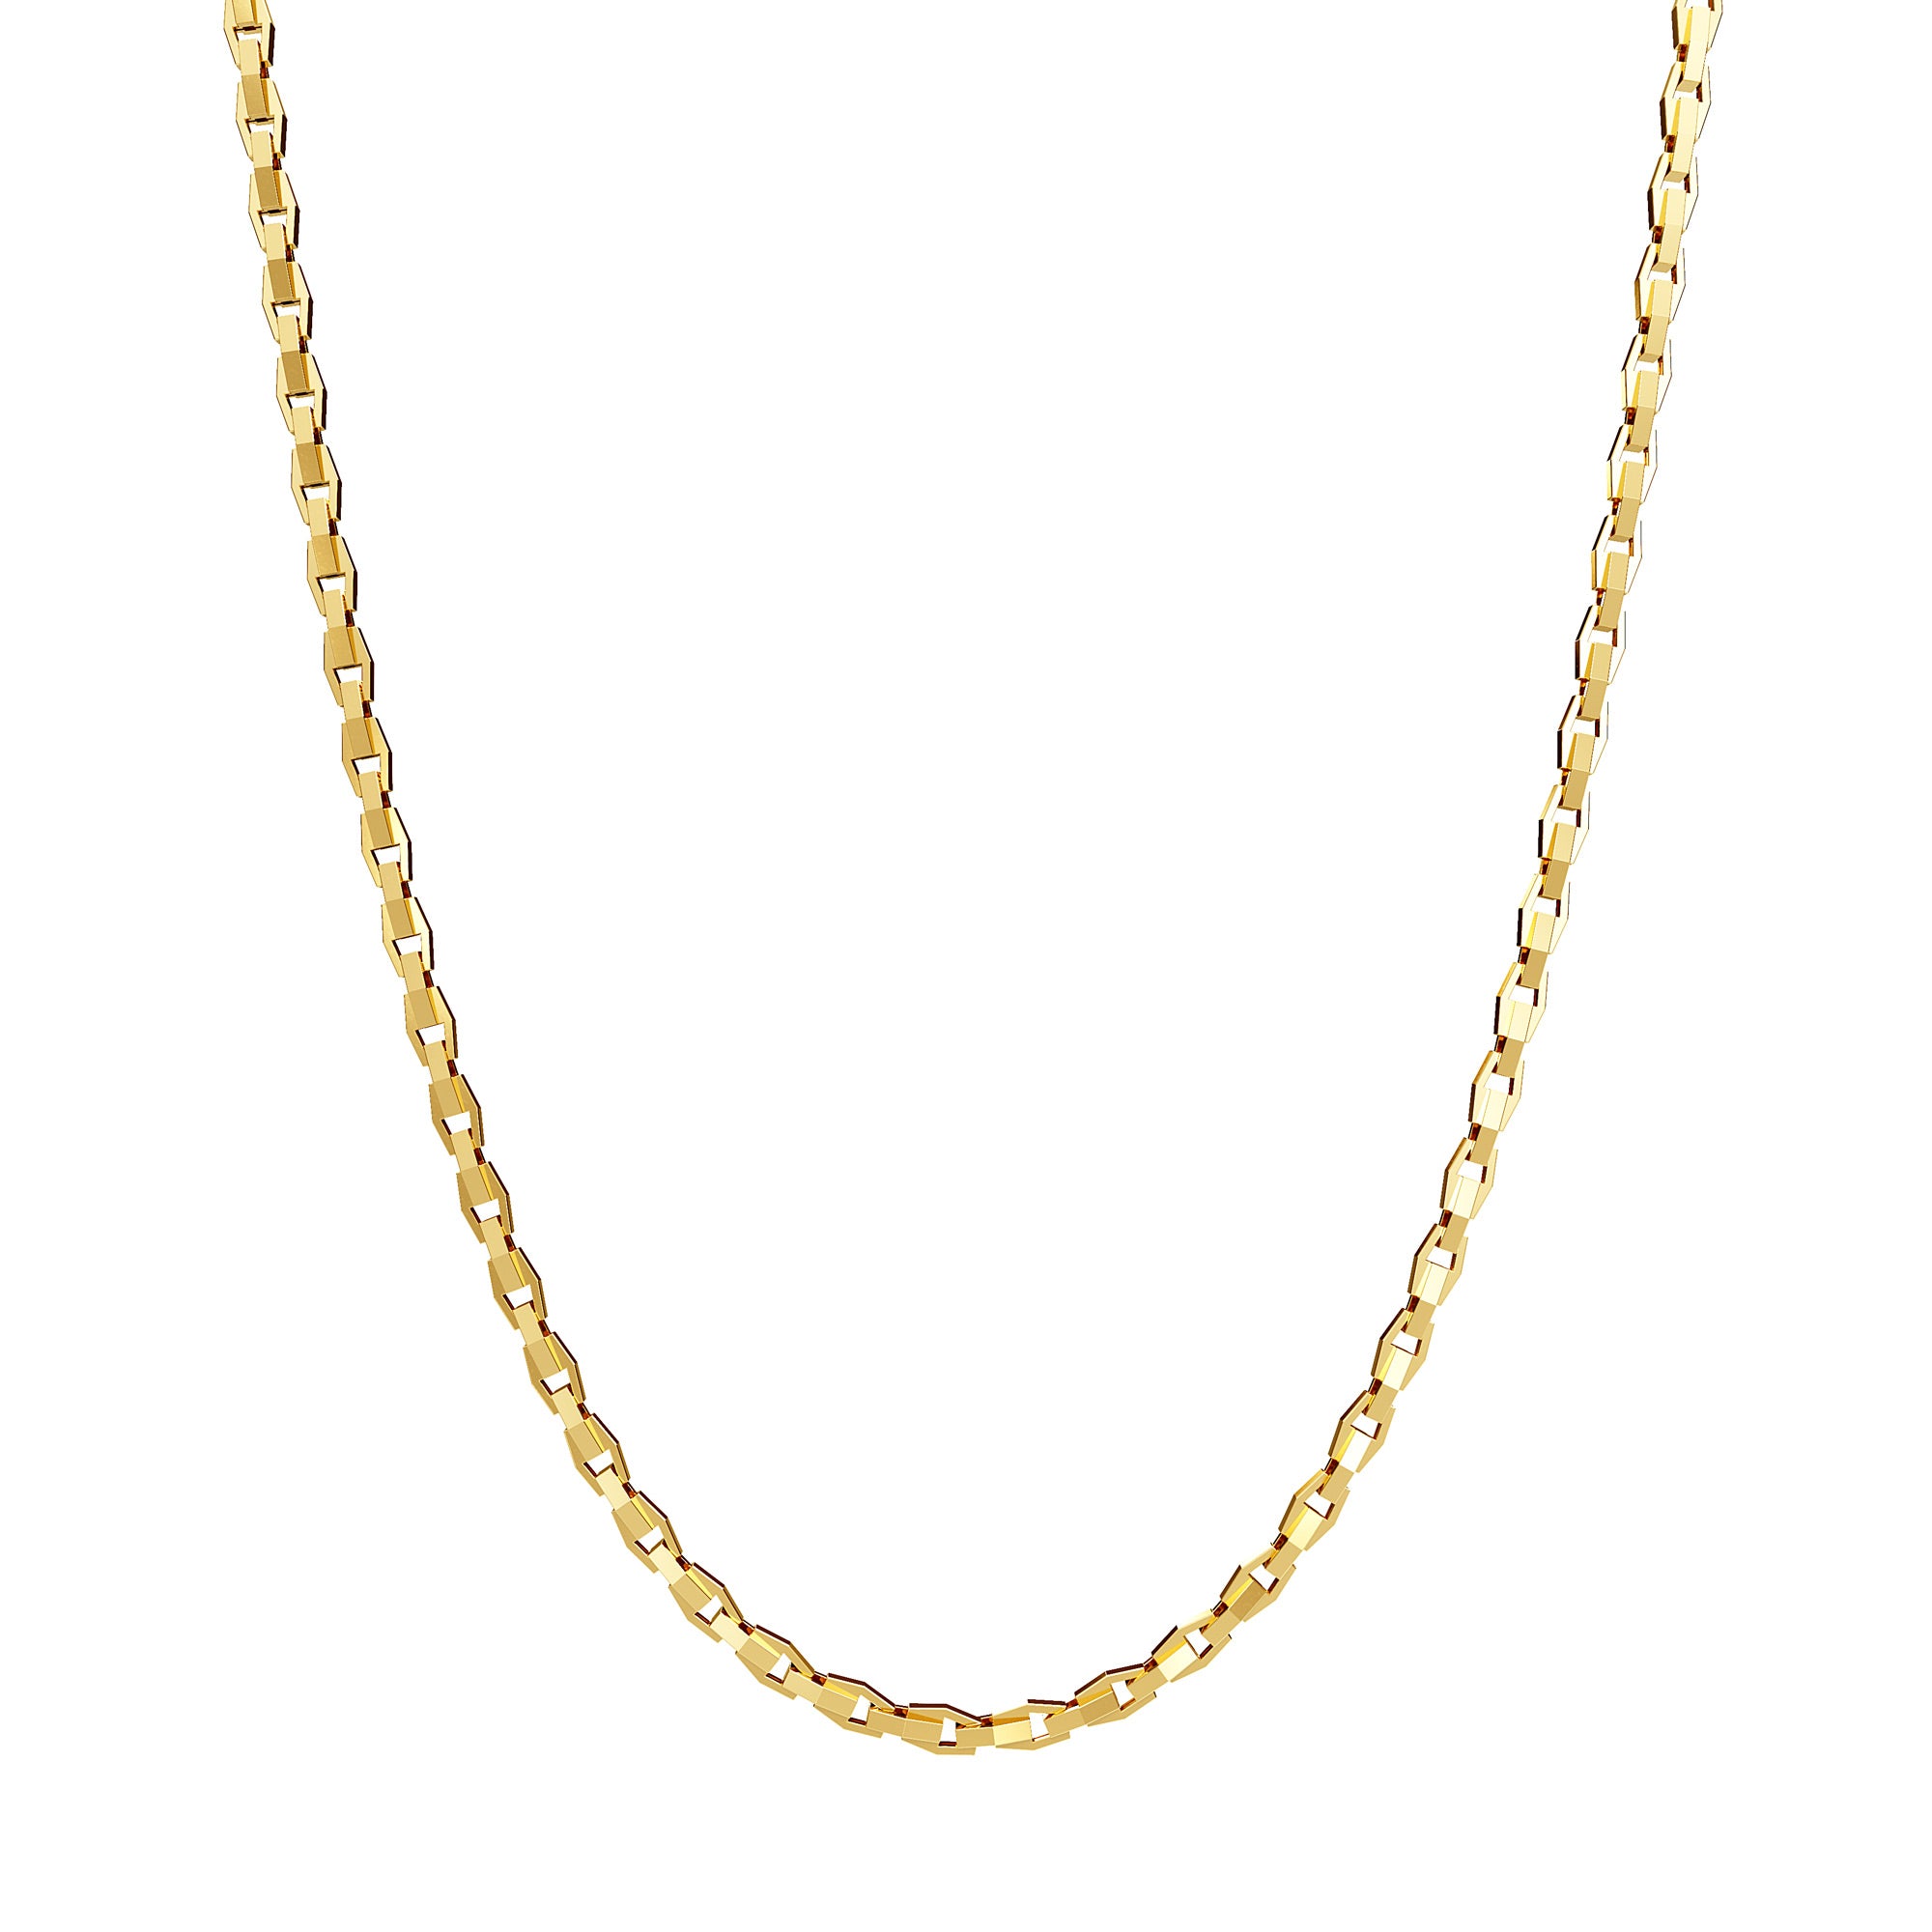 Geometric 5mm Link Chain in 10k Yellow Gold